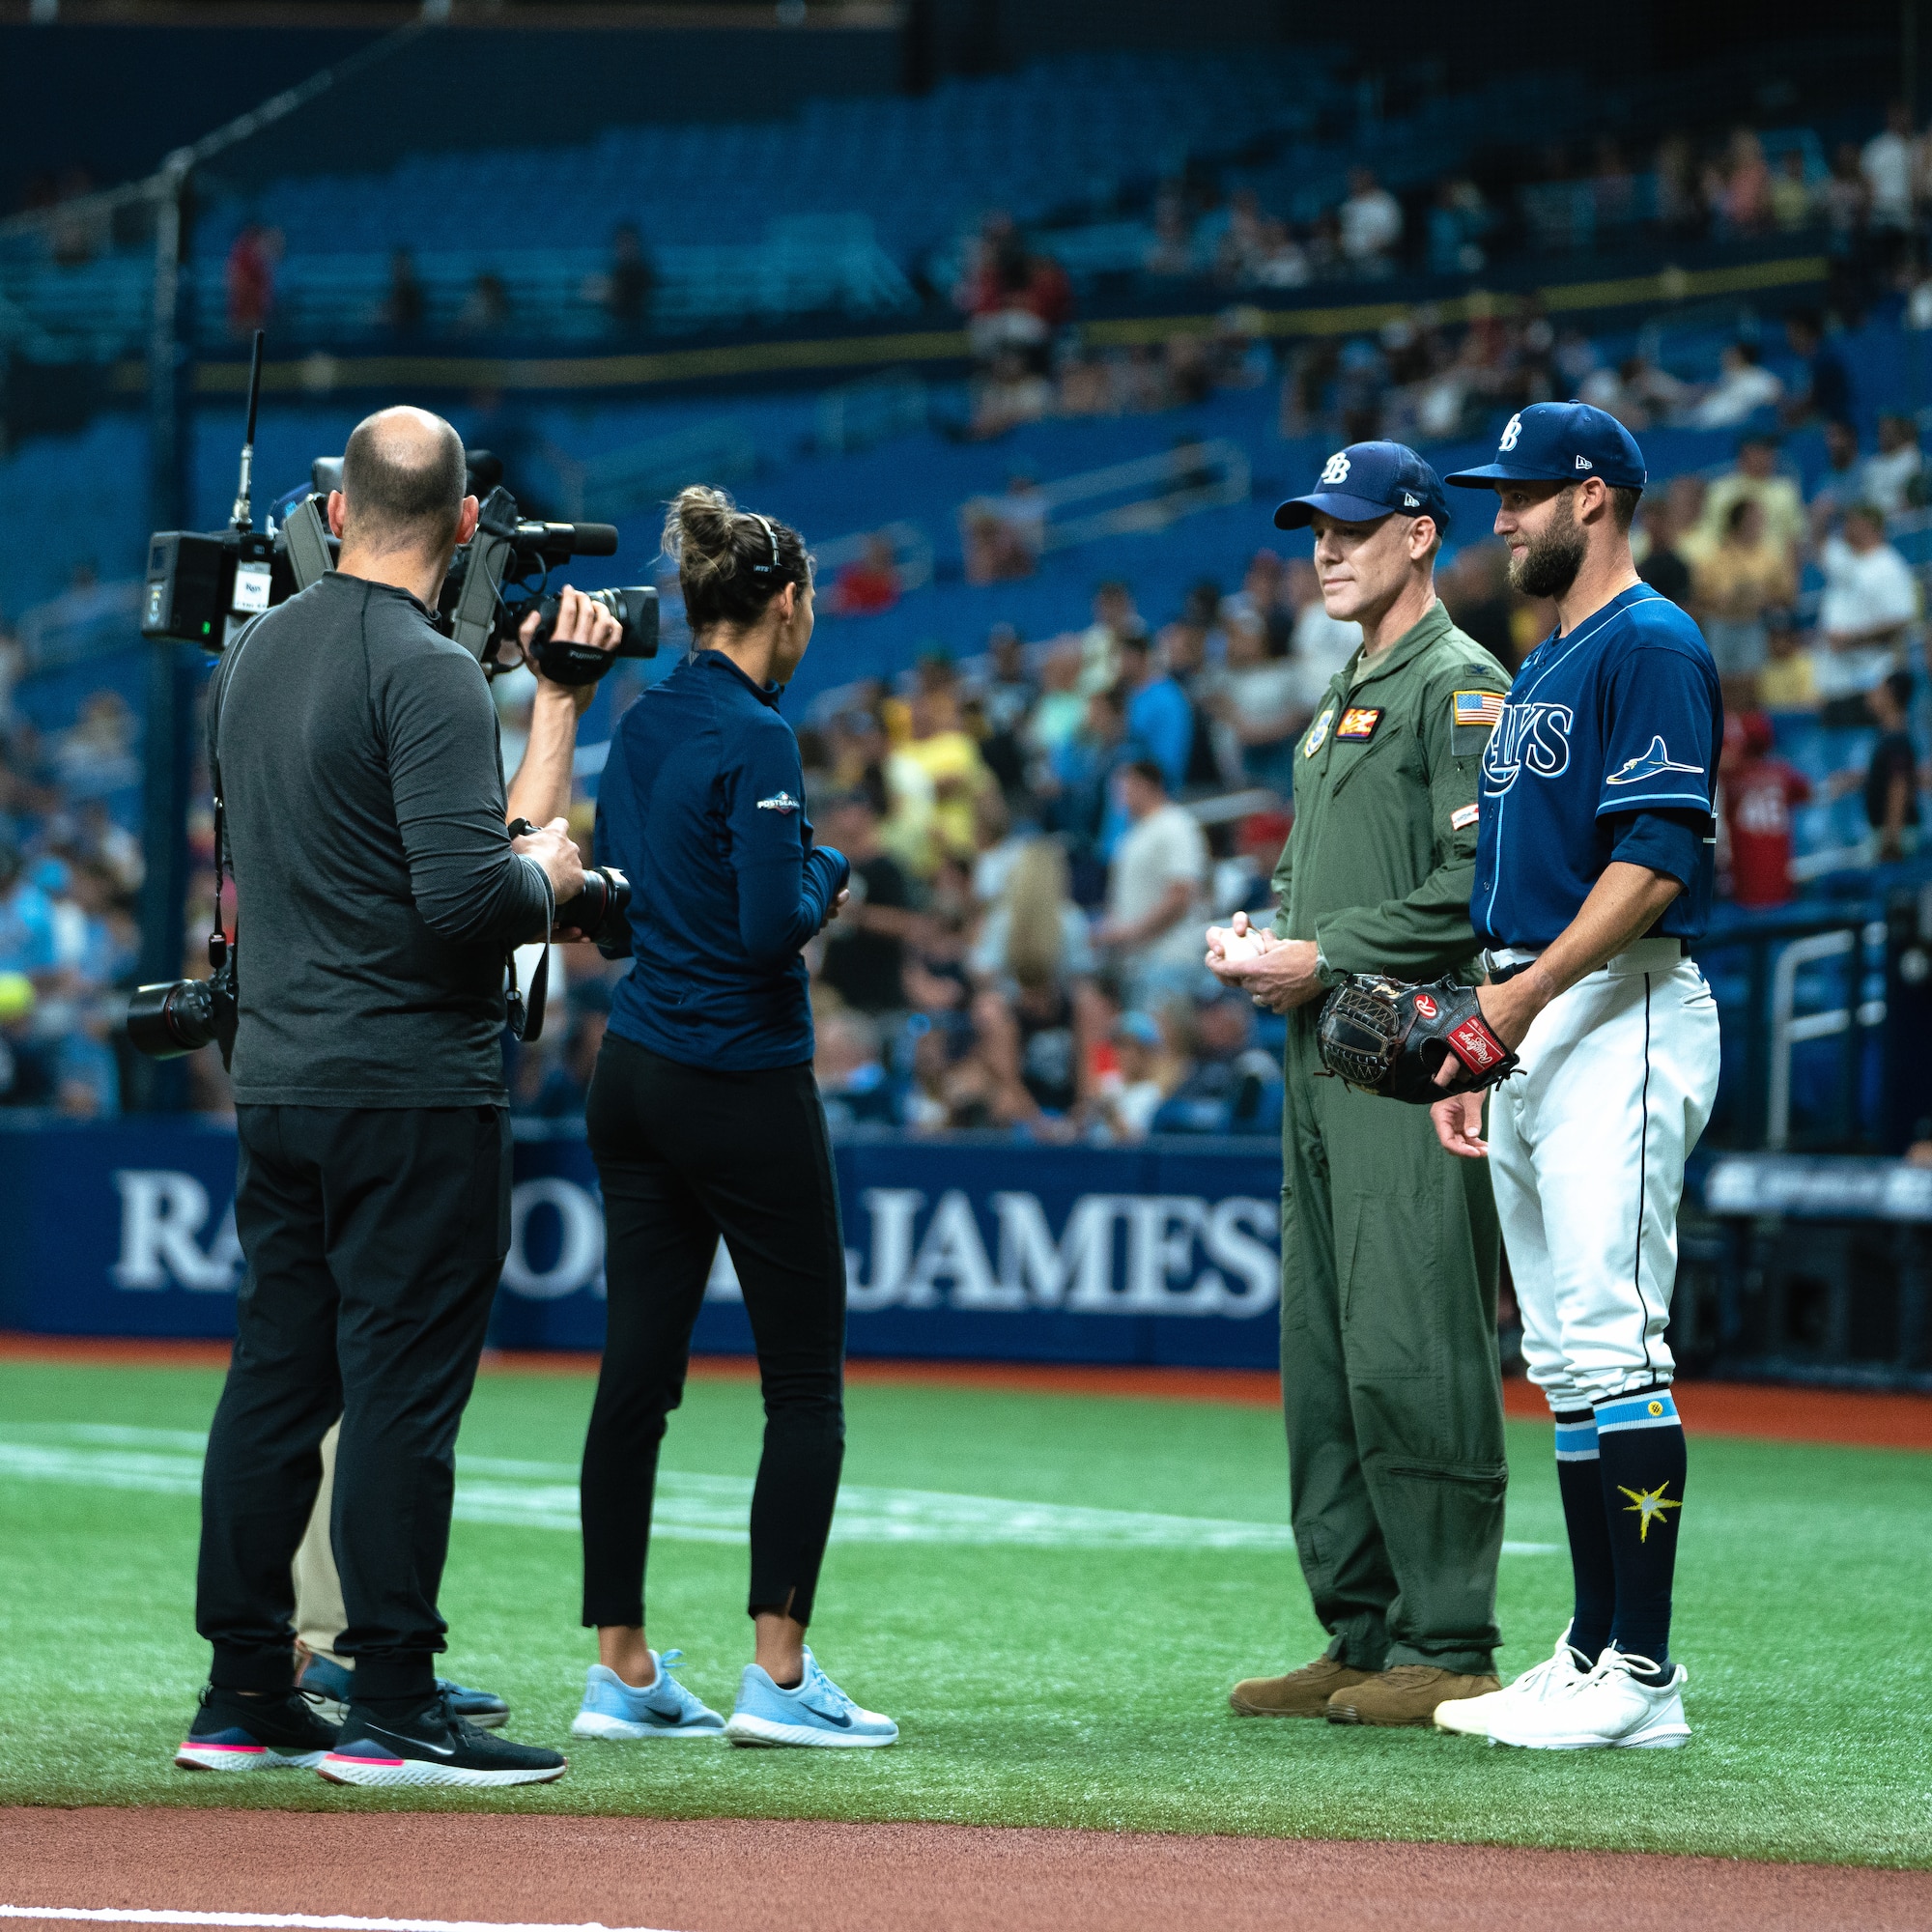 U.S. Air Force Col. Benjamin Jonsson speaks with the Tampa Bay Rays public affairs team prior to a game at Tropicana Field in St. Petersburg, Florida, June 8, 2022.